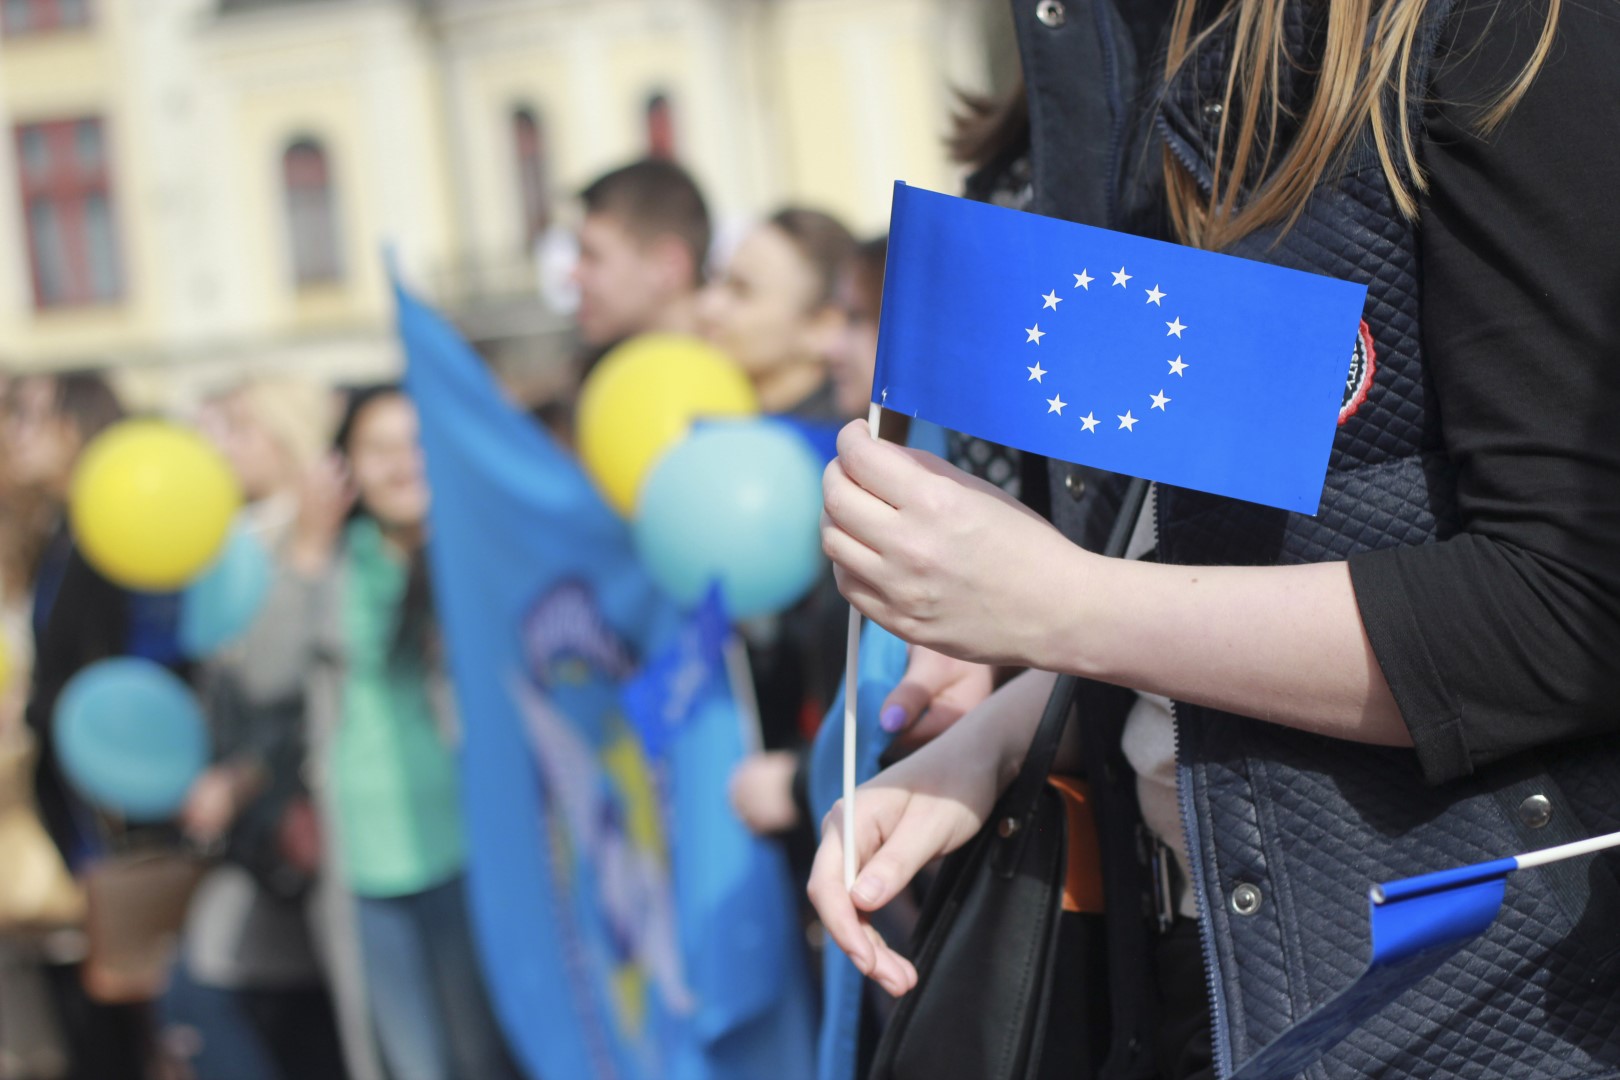 Attend the ‘Youth Shaping Their Future with the EU’ Seminar To Learn About The Education Opportunities in Europe